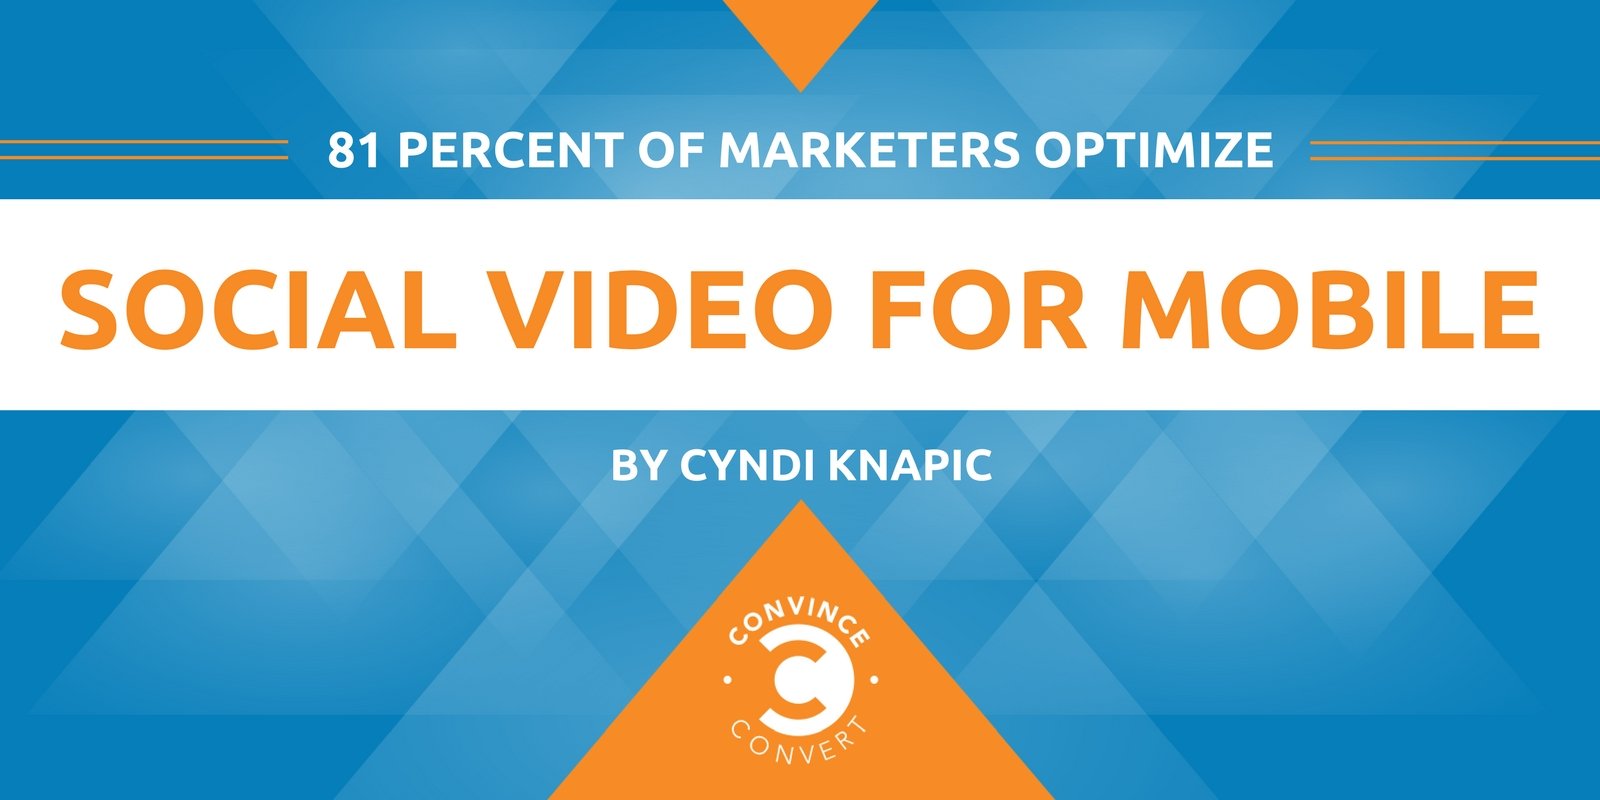 81 Percent of Marketers Optimize Social Video for Mobile [Infographic]